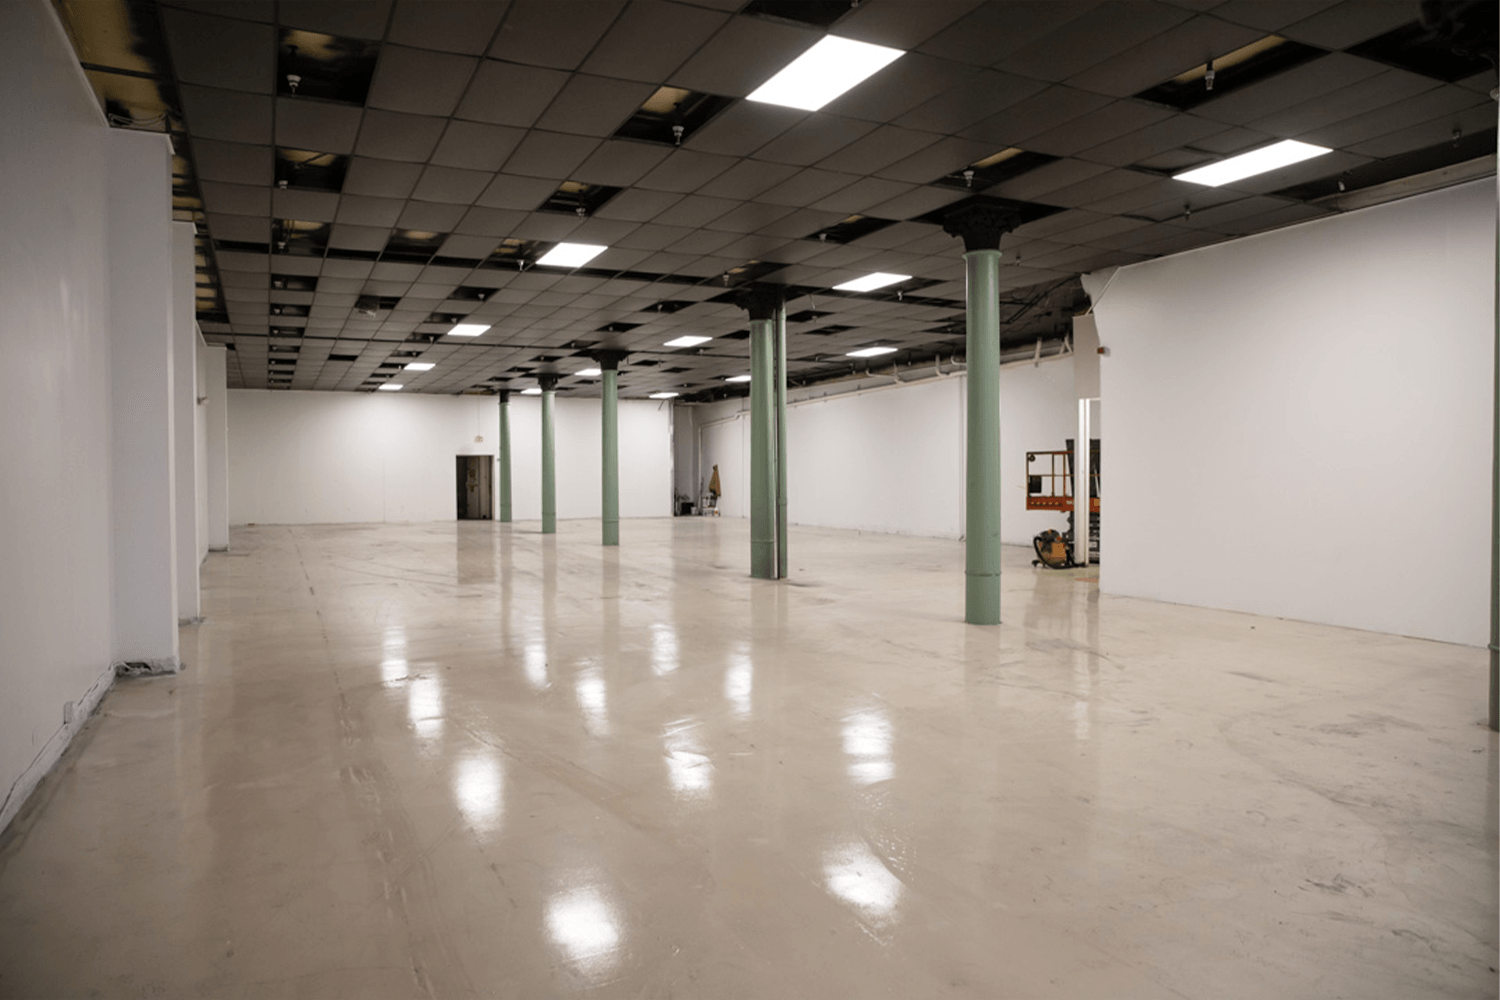 empty room with high ceilings, white walls, and green pillars